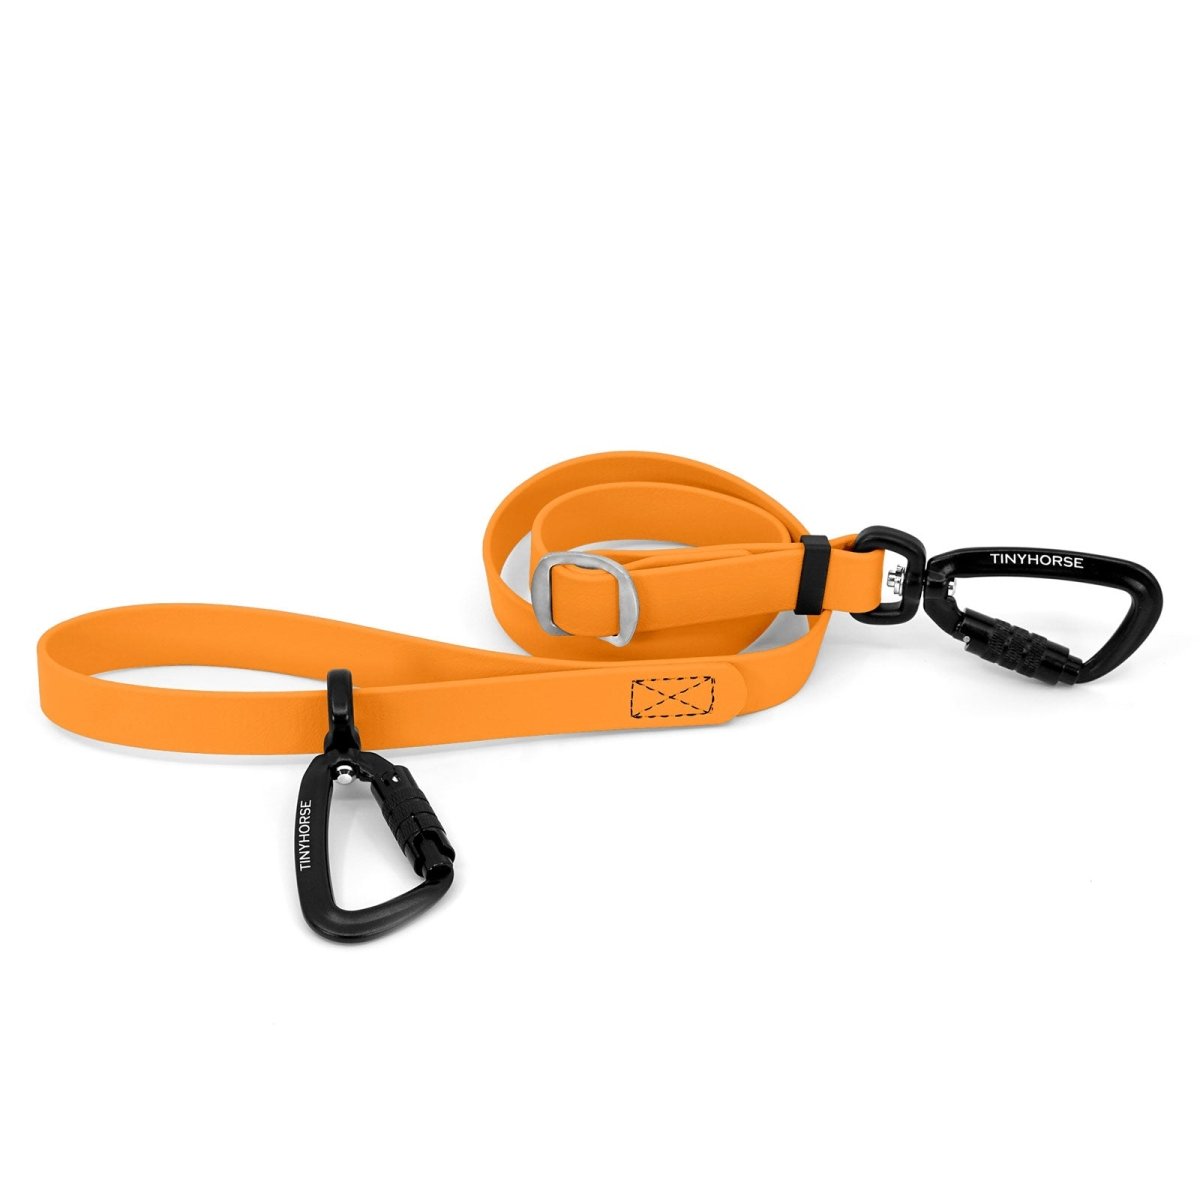 An adjustable creamsicle-coloured Lead-All Pro made of BioThane with 2 auto-locking carabiners